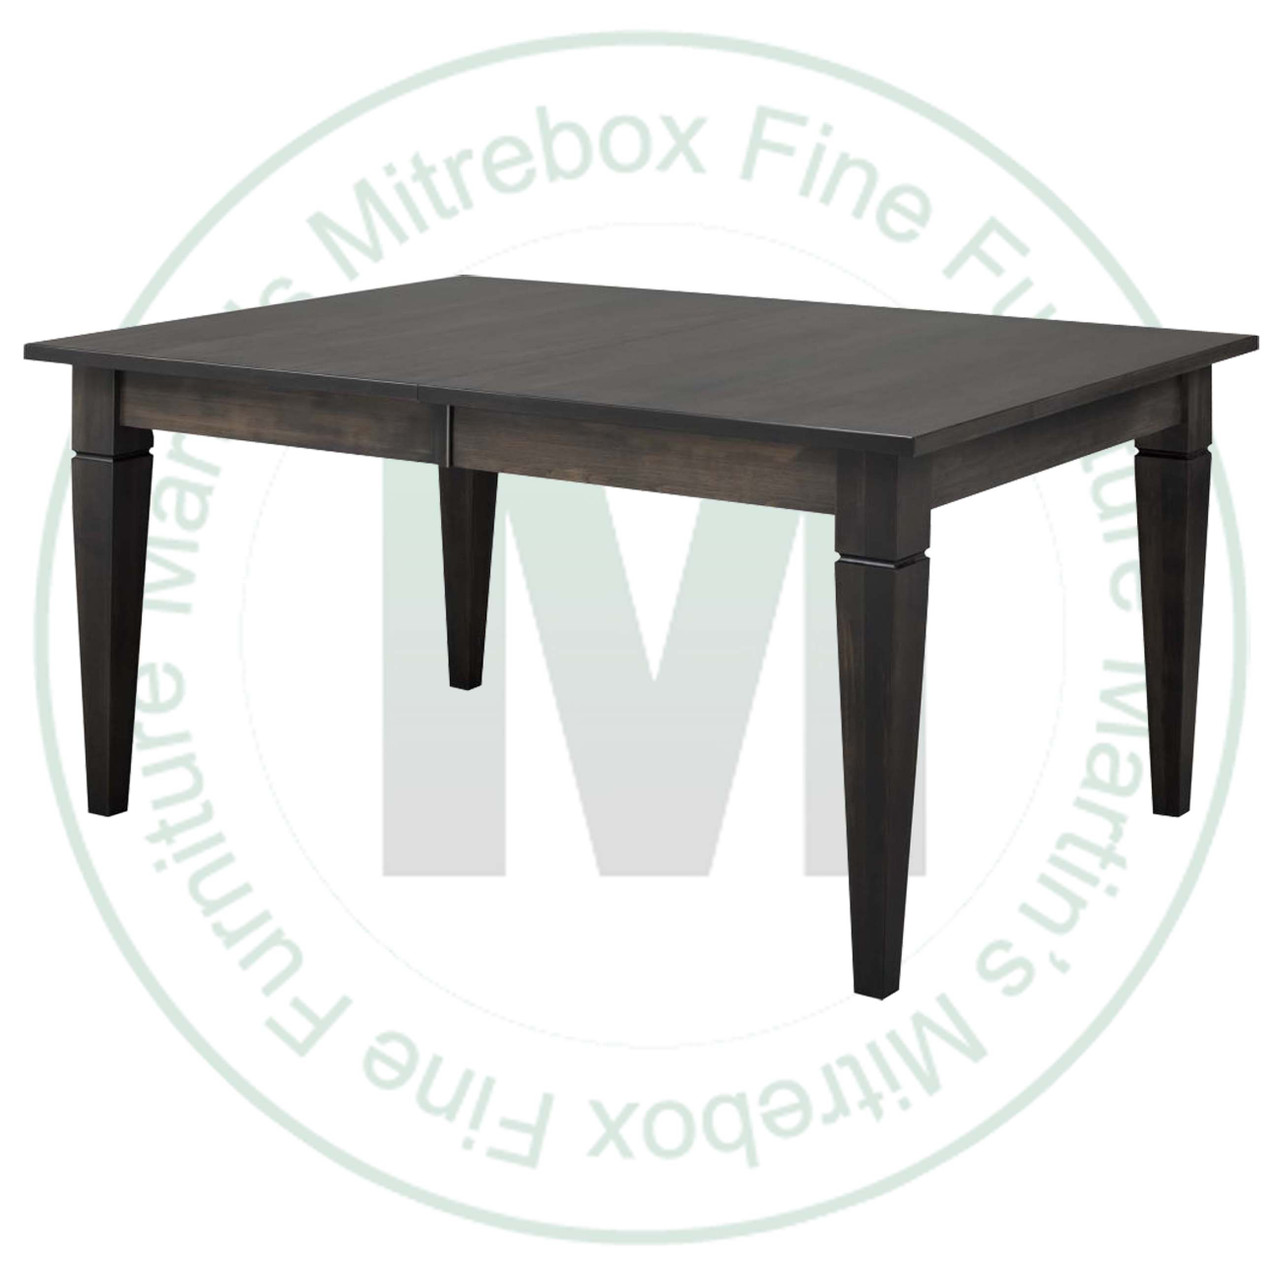 Maple Reesor Solid Top Harvest Table 36''D x 48''W x 30''H Table Has 1 3/4'' Thick Top And 2 - 16'' Extensions